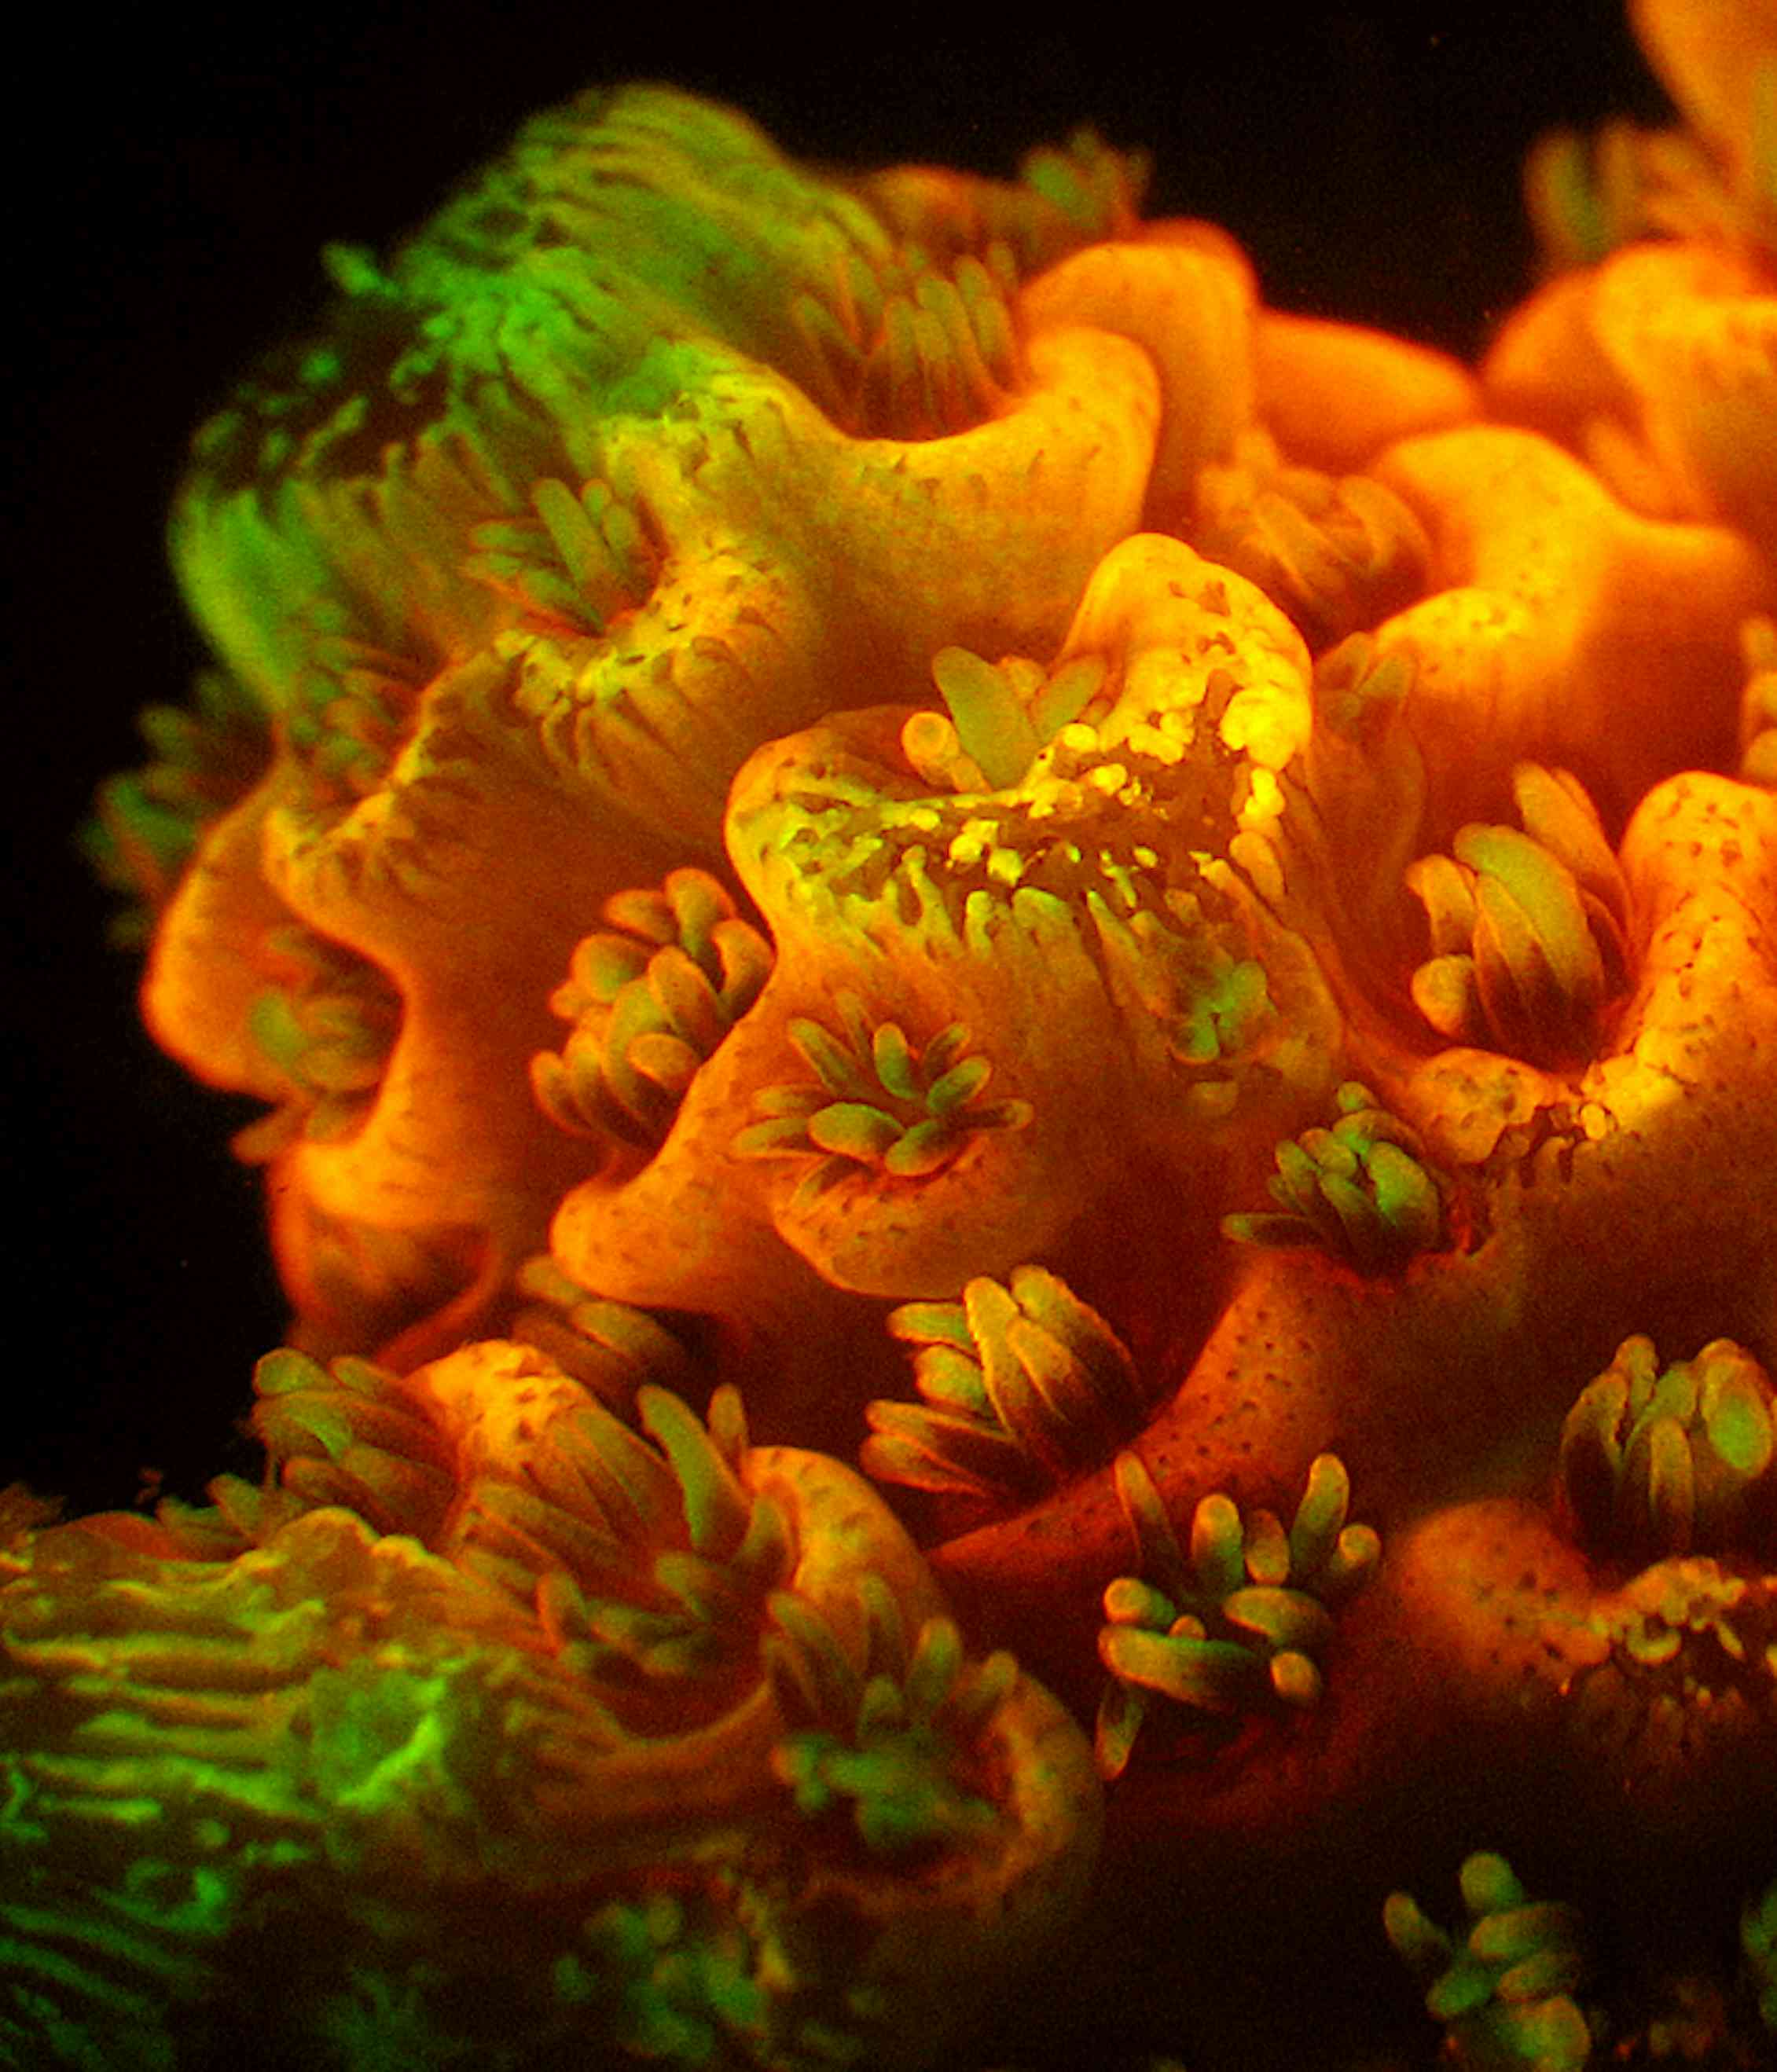 Revealed: why some corals are more colourful than others